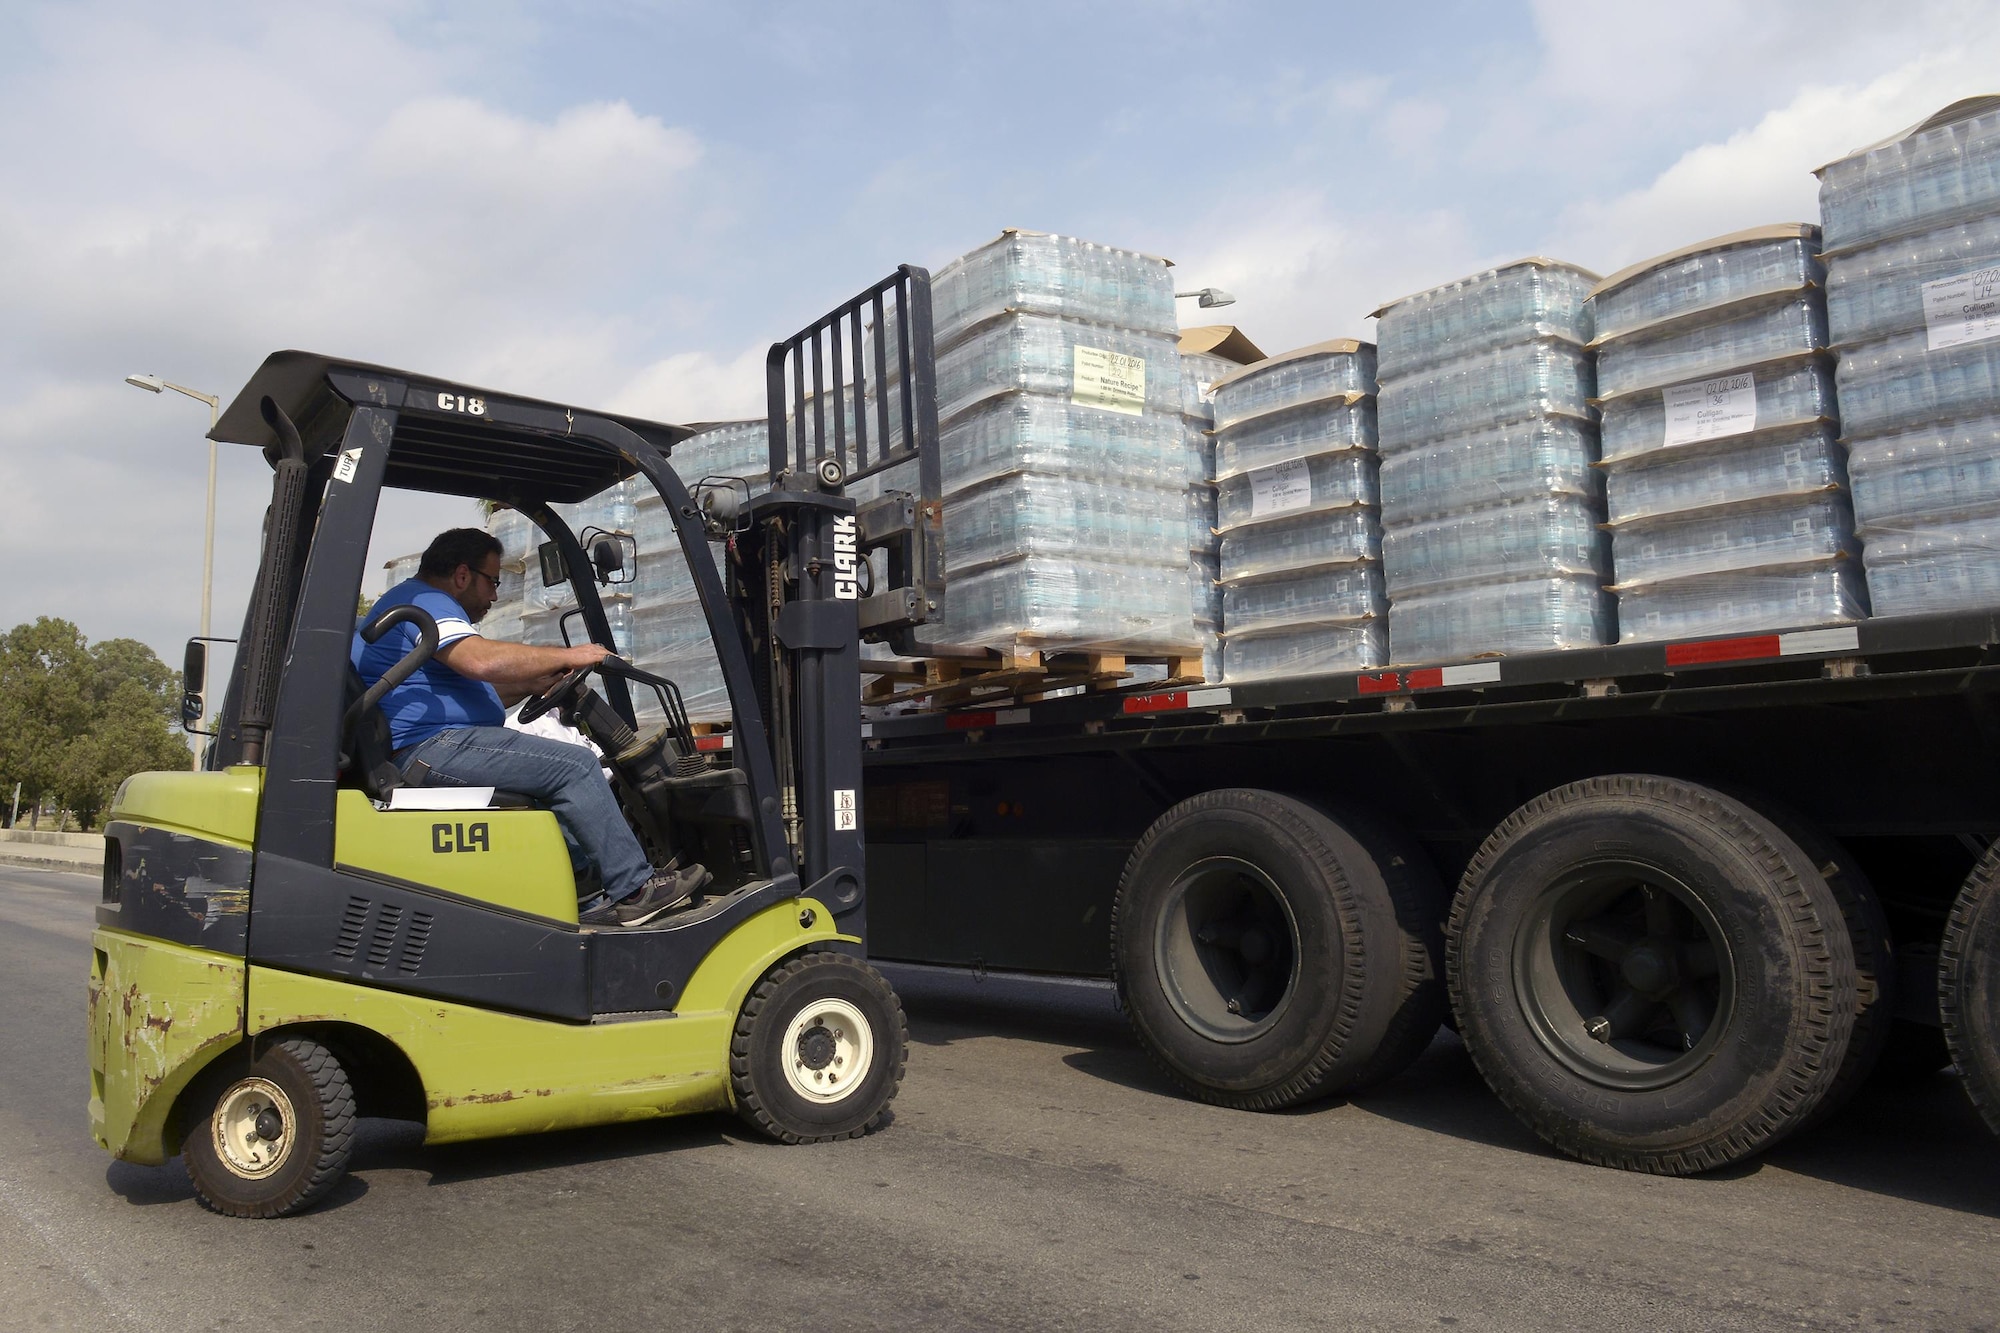 Pallets of water are loaded onto a truck for relocation July 19, 2016, on Incirlik Air Base, Turkey.  The base received many different supplies including food, fuel and water after an extended commercial power outage caused a break in the normal supply chain. (U.S. Air Force photo by Master Sgt. Derrick C. Goode) 